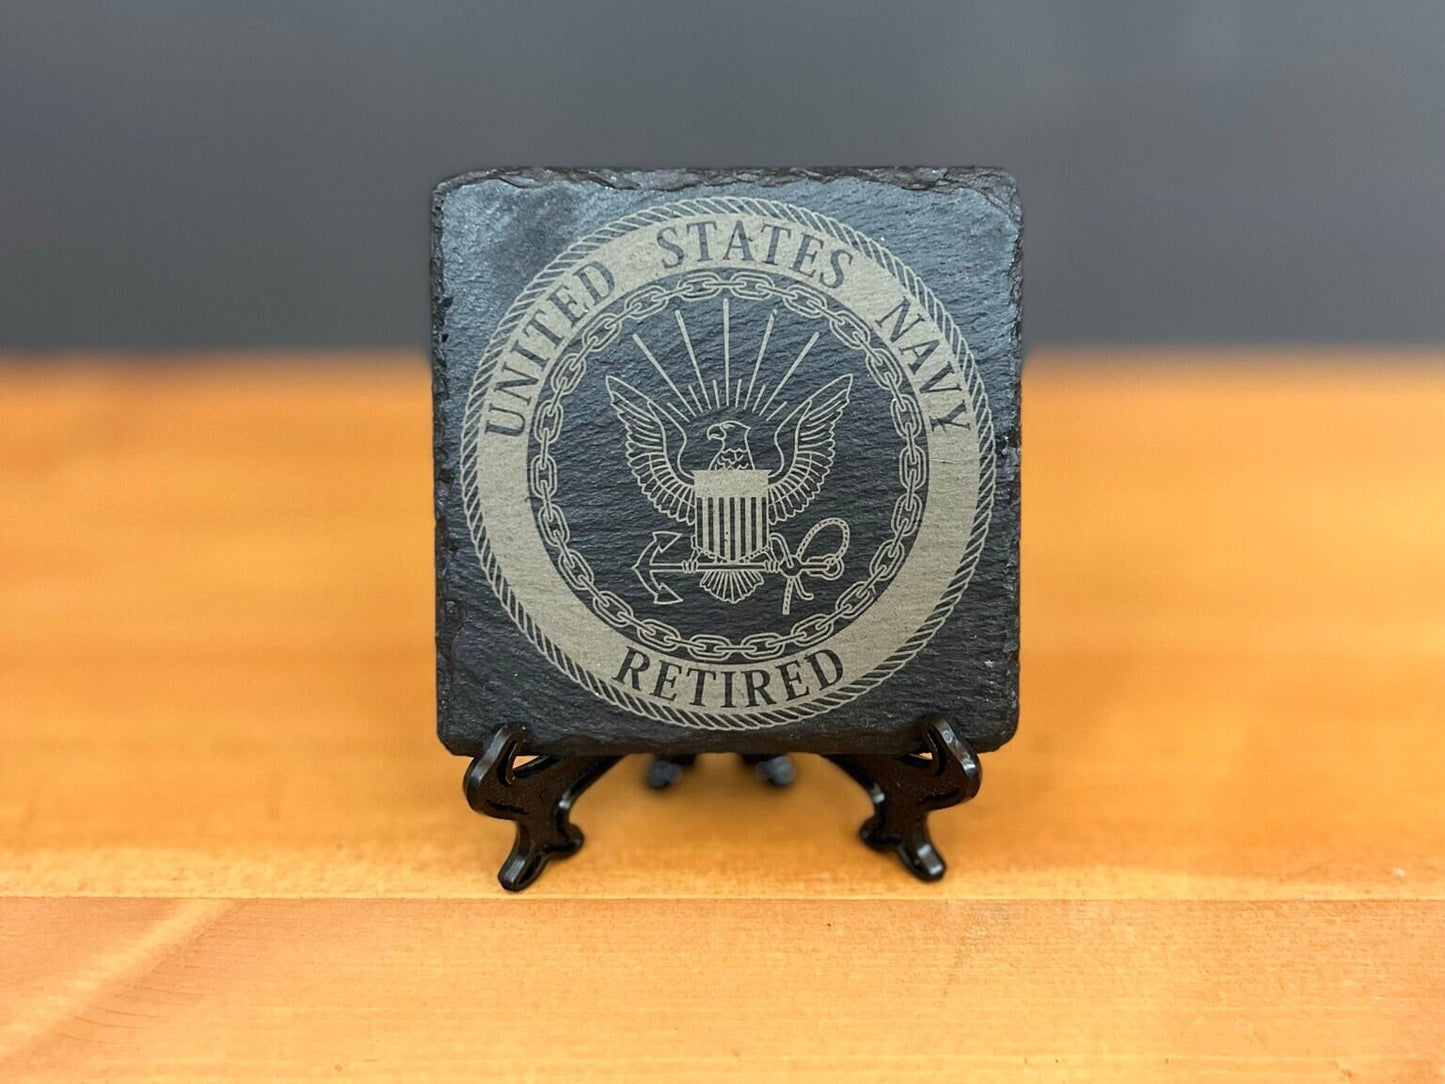 Laser Engraved Slate Coaster with the United States Navy Retired Seal